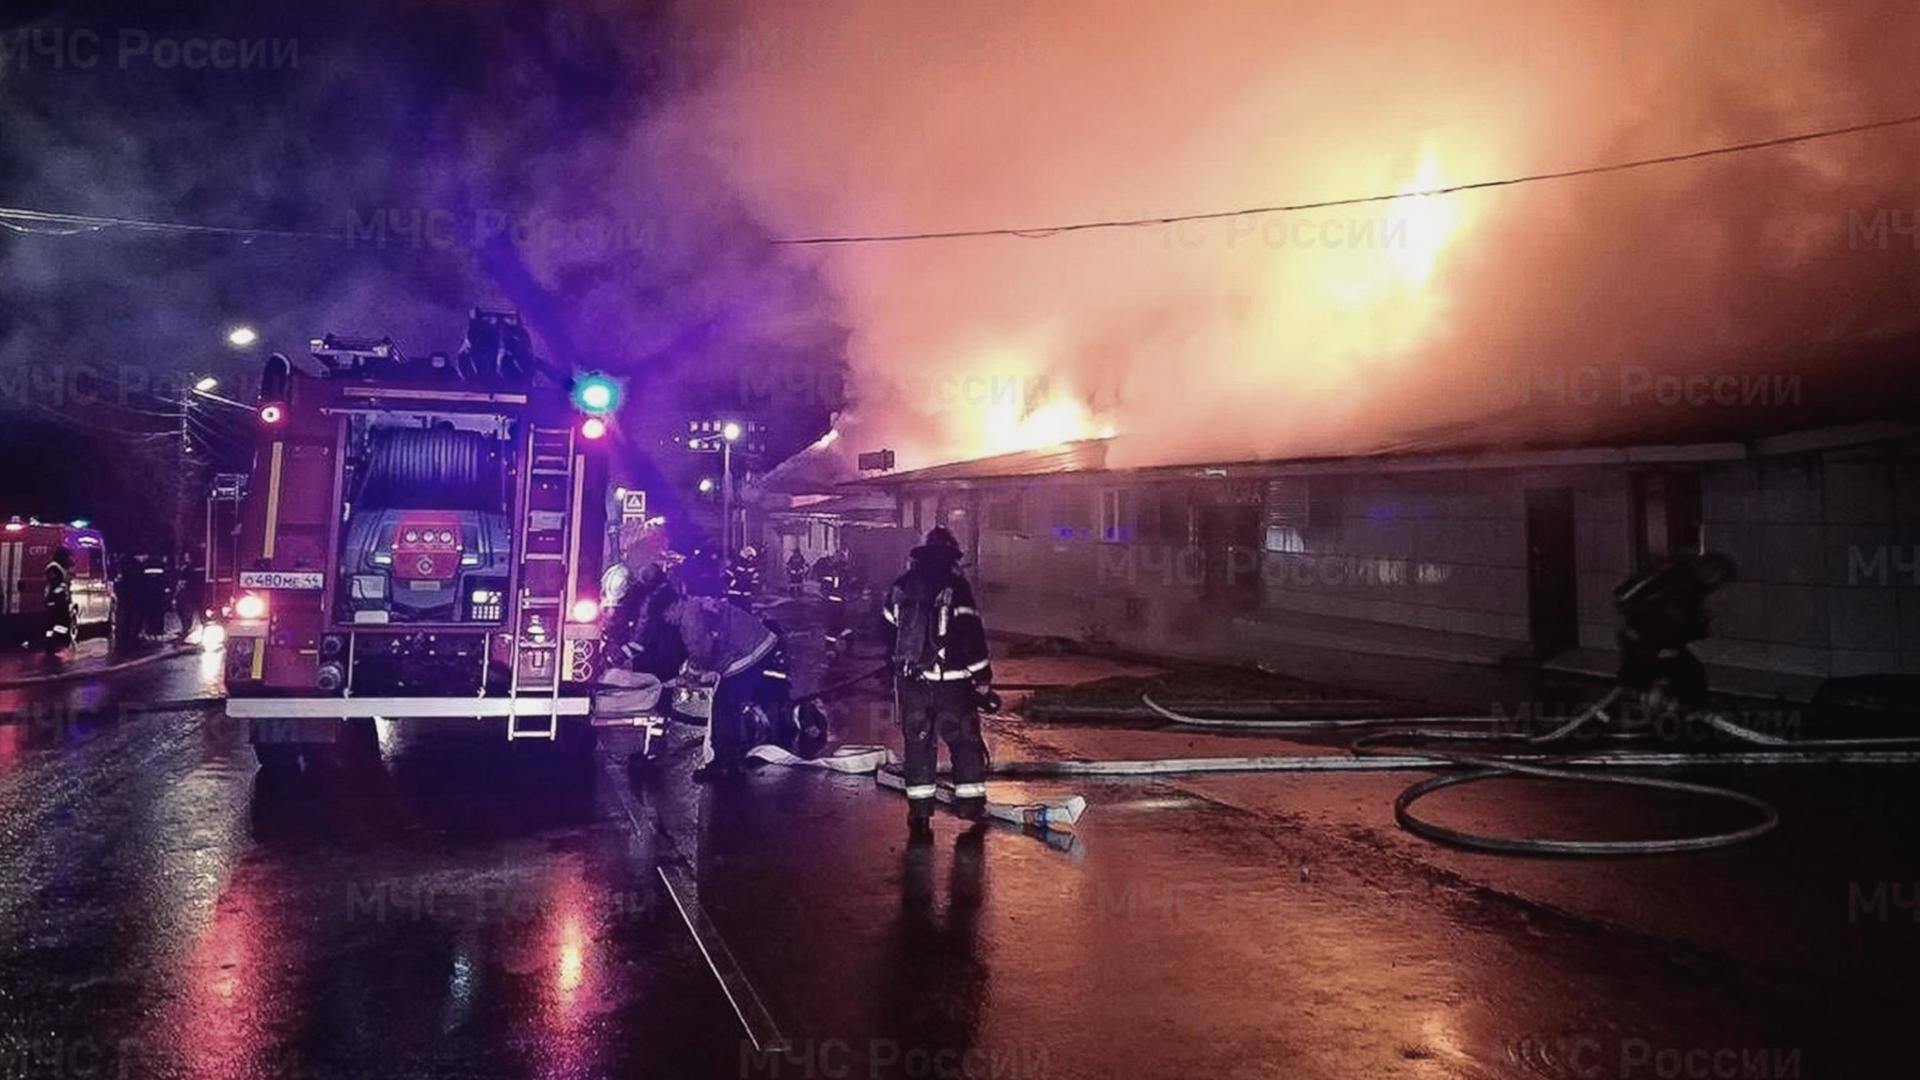 15 die after fire engulfs popular Russian cafe